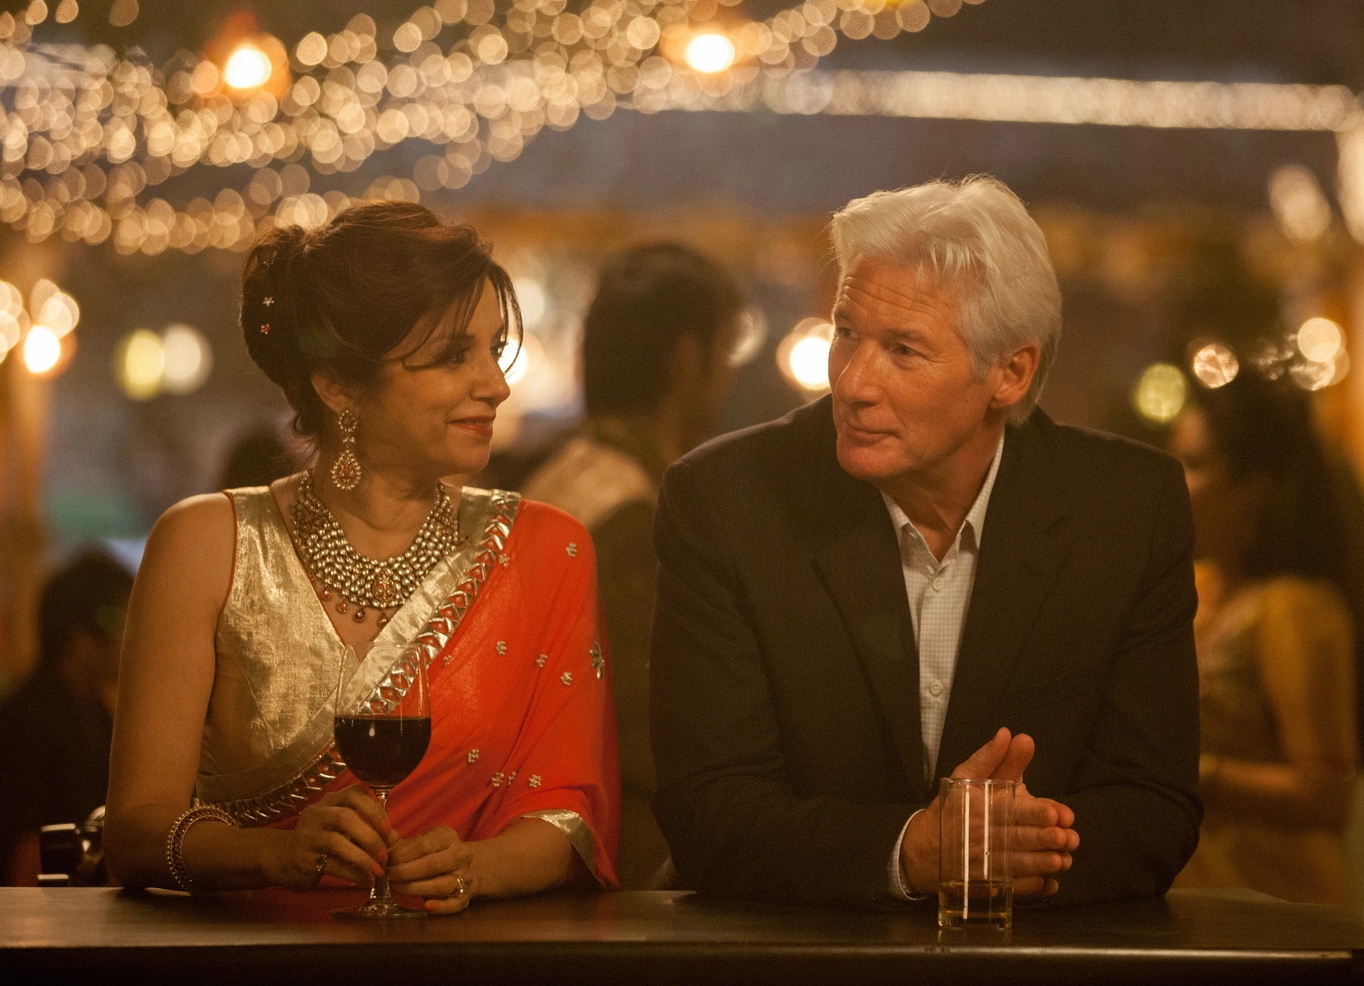 Best Exotic Marigold Hotel 2 / Second Best Exotic Marigold Hotel, The